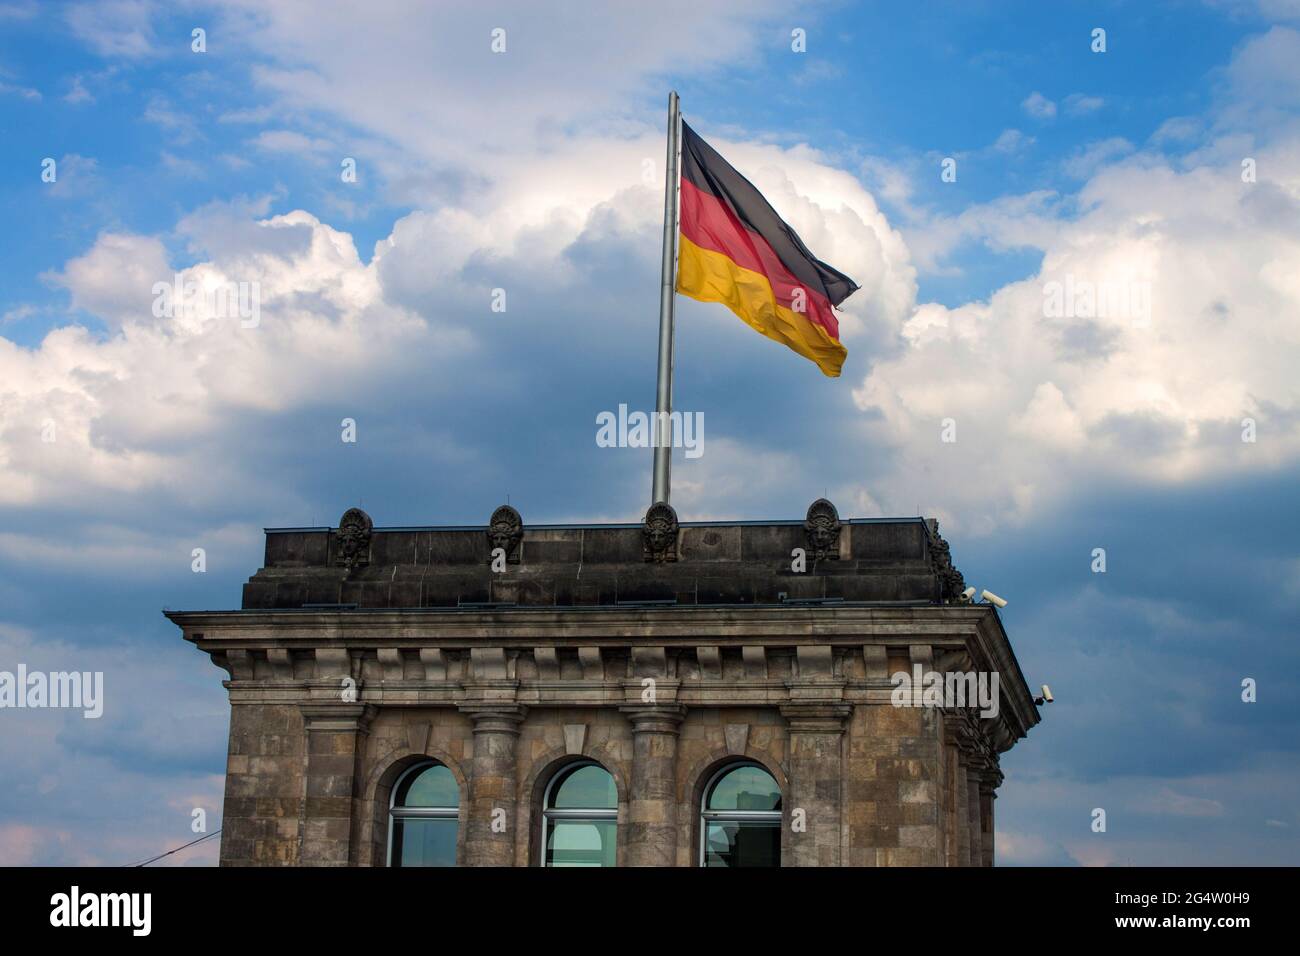 Tower with German flag on the top of Reichstag building, Berlin, Germany Stock Photo